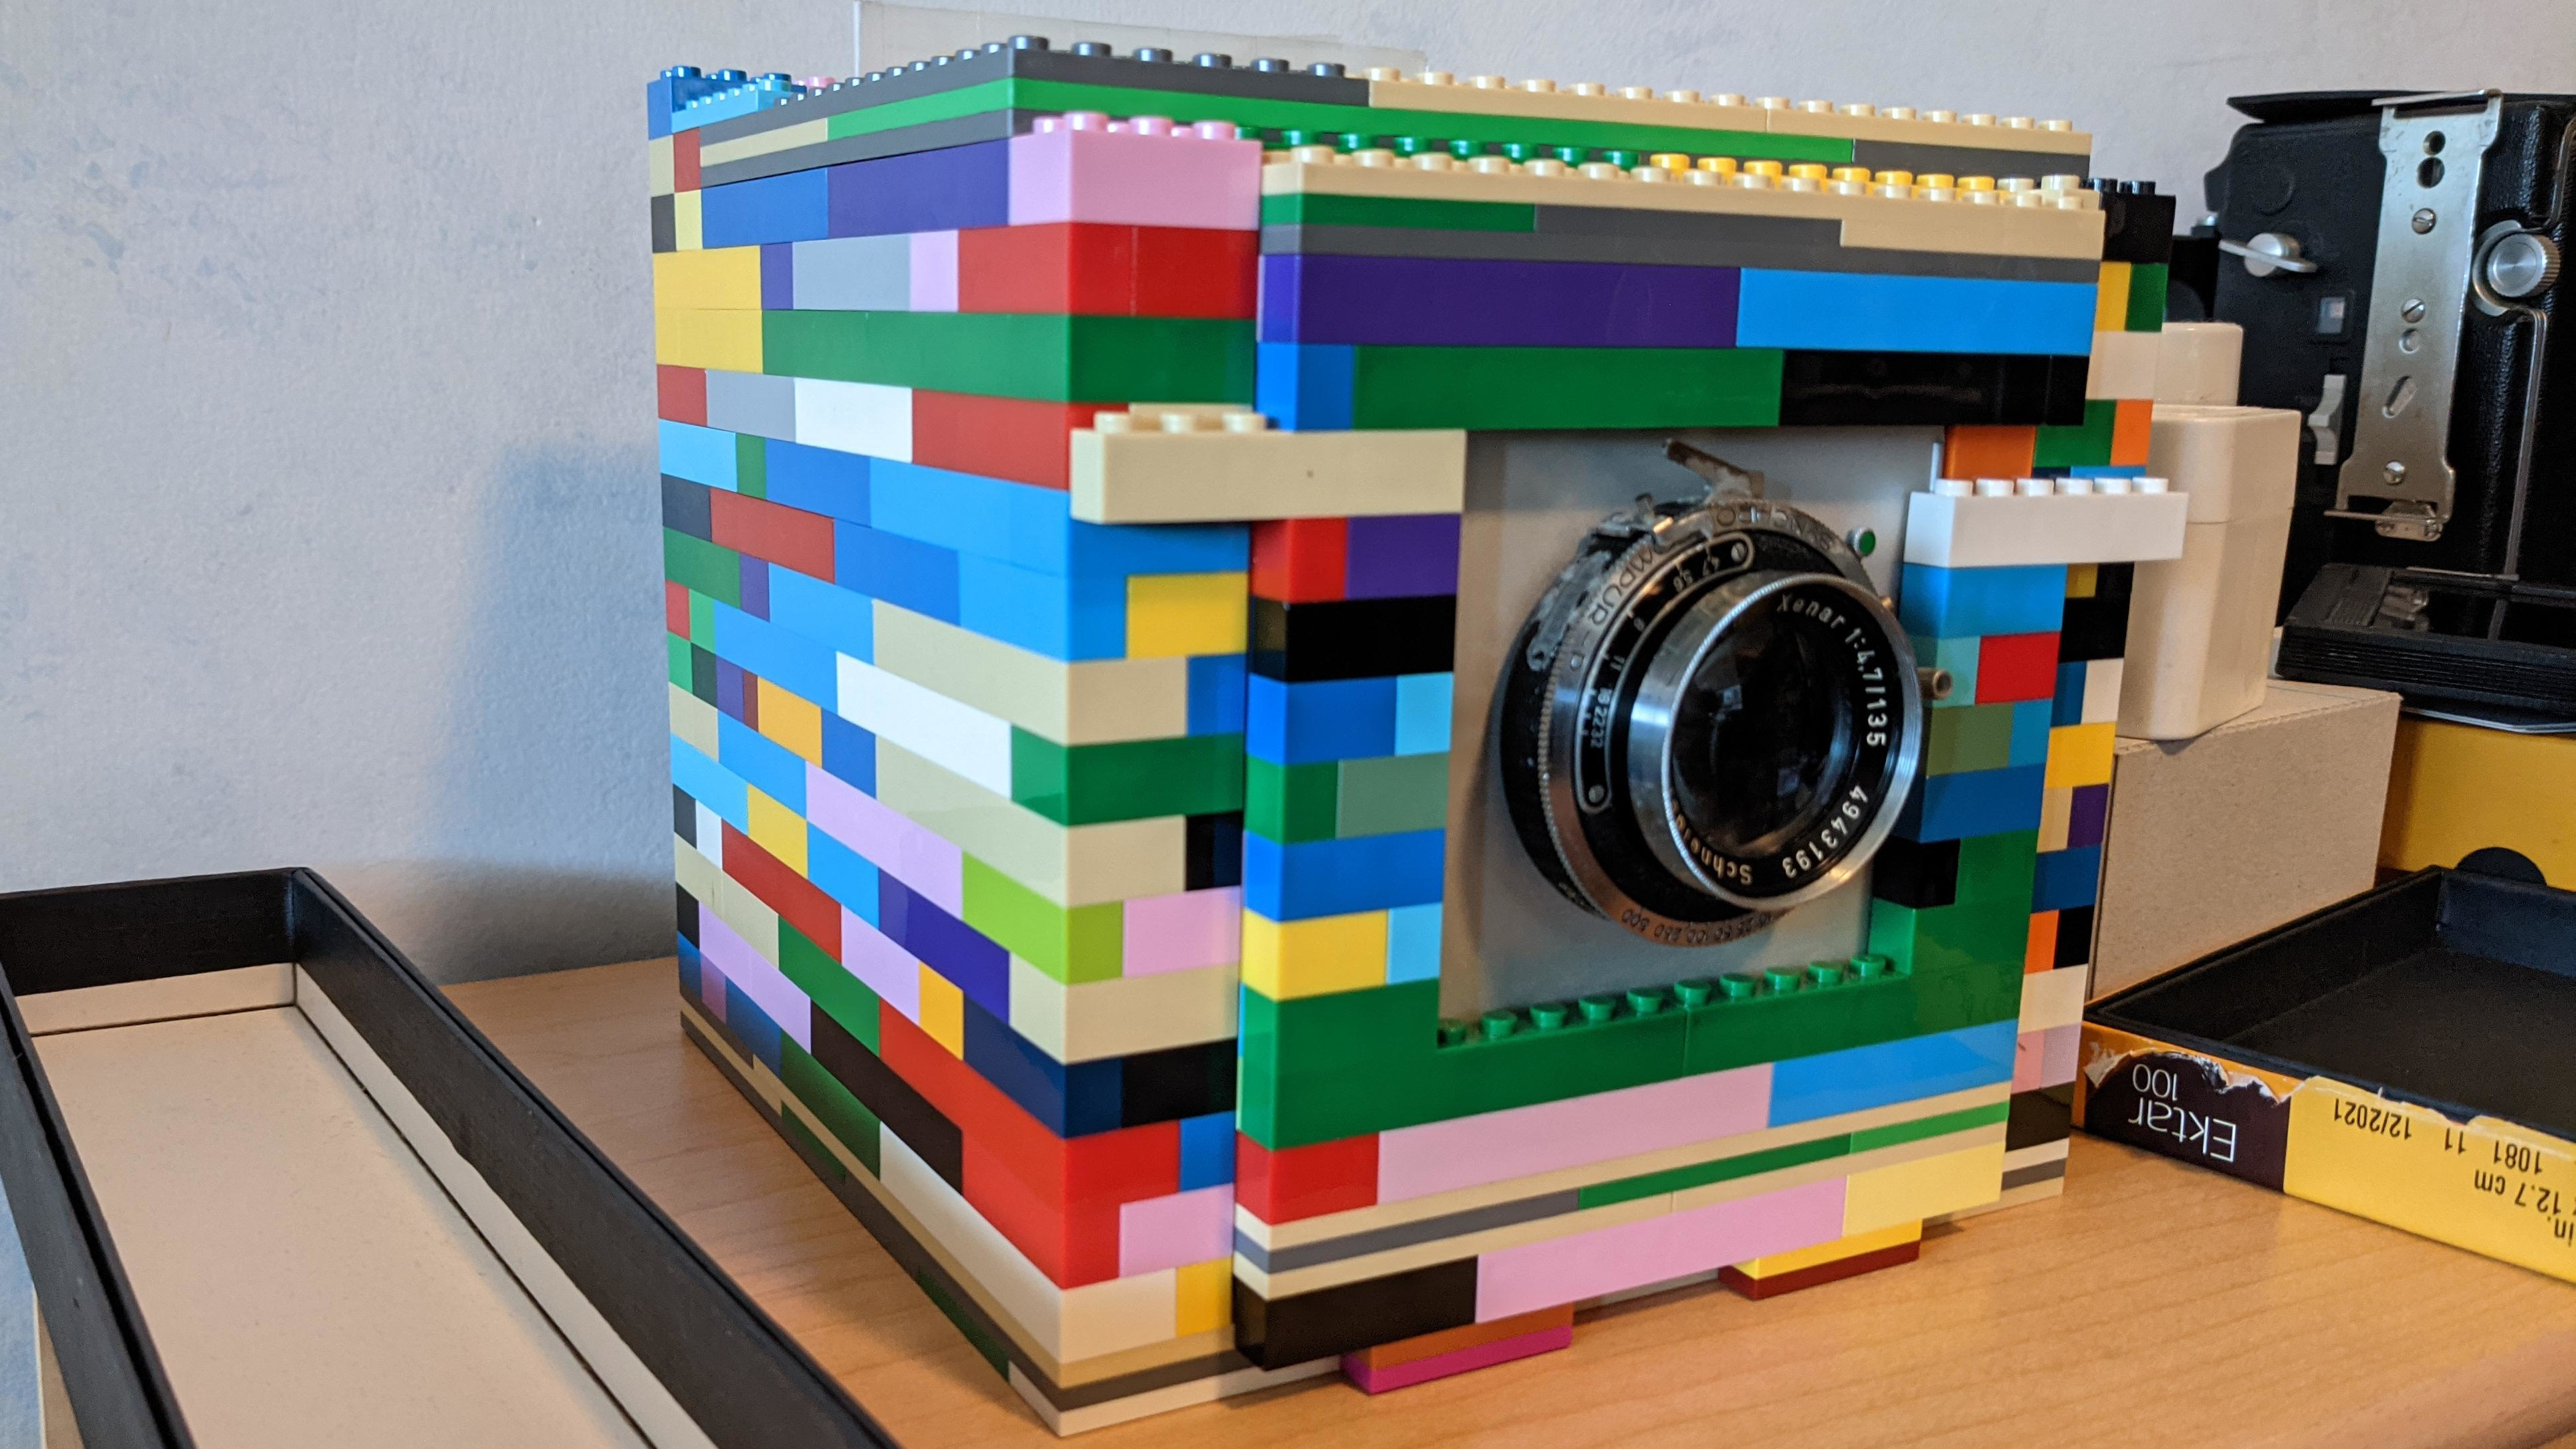 Large Format Lego Camera Is A Bit Near-Sighted